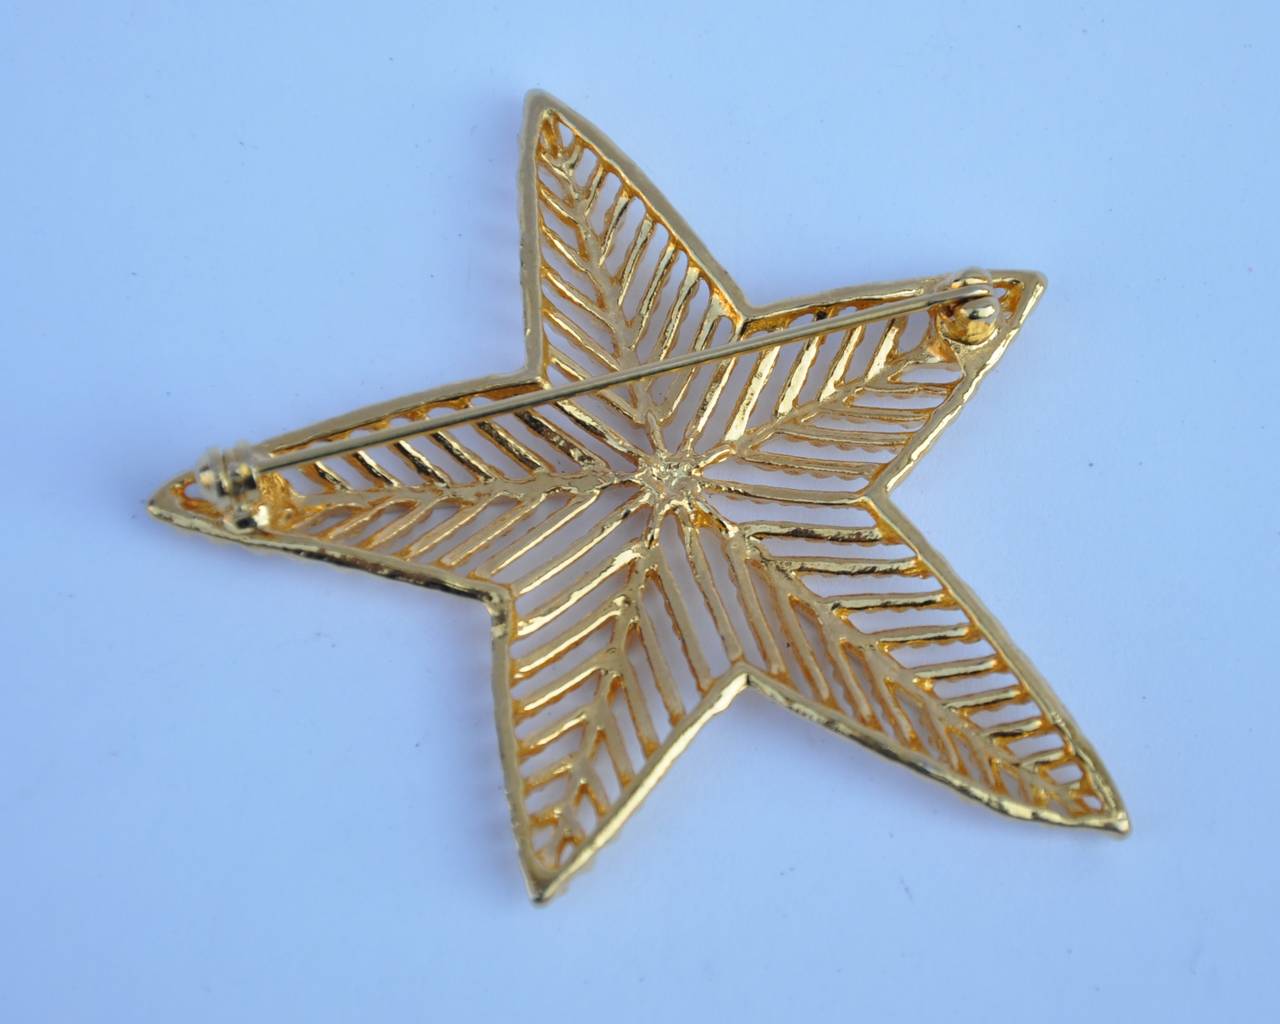 This wonderful gilded gold vermeil finish "Shining Star" brooch measures 2 3/8" in length across, 2 1/4" in height and 2/8" in depth.